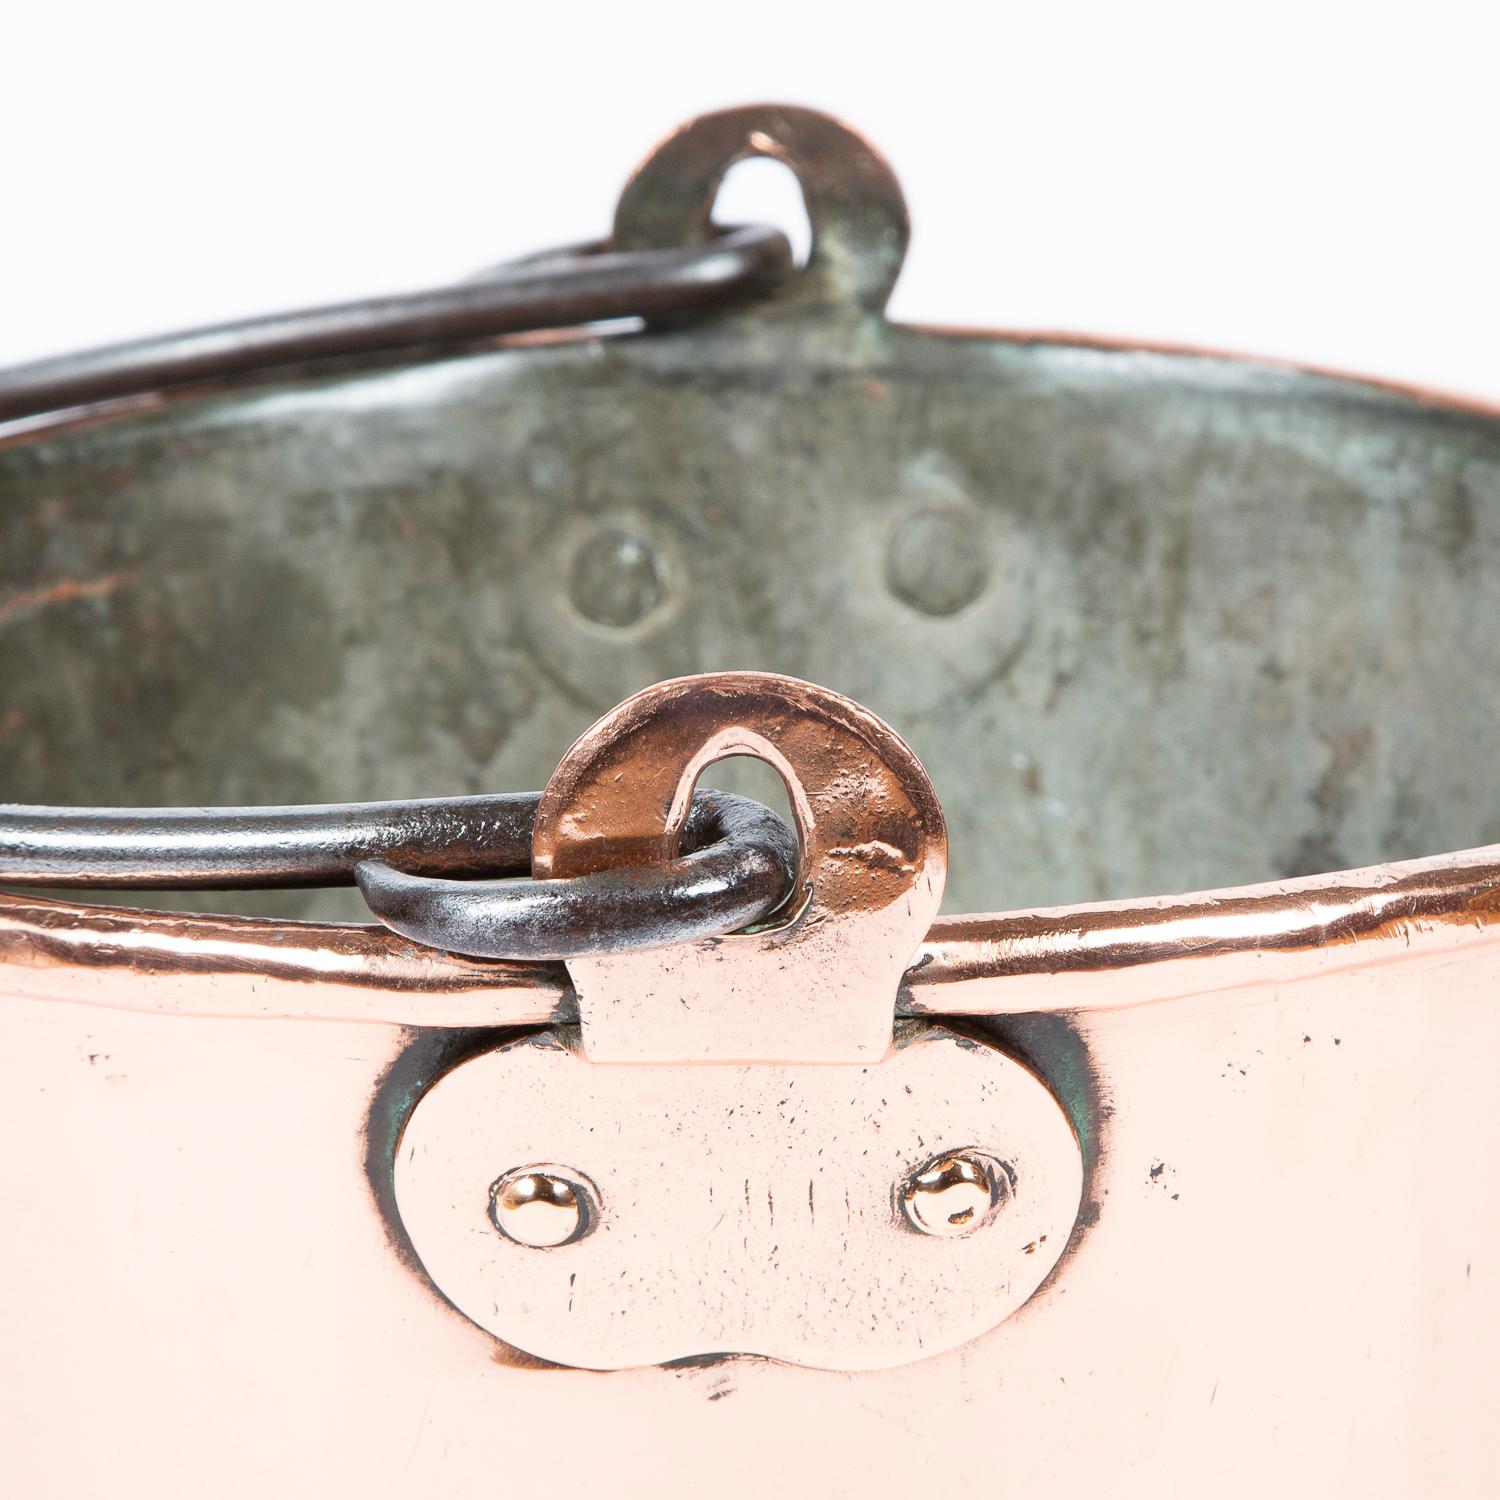 English Copper Fire Bucket For Sale